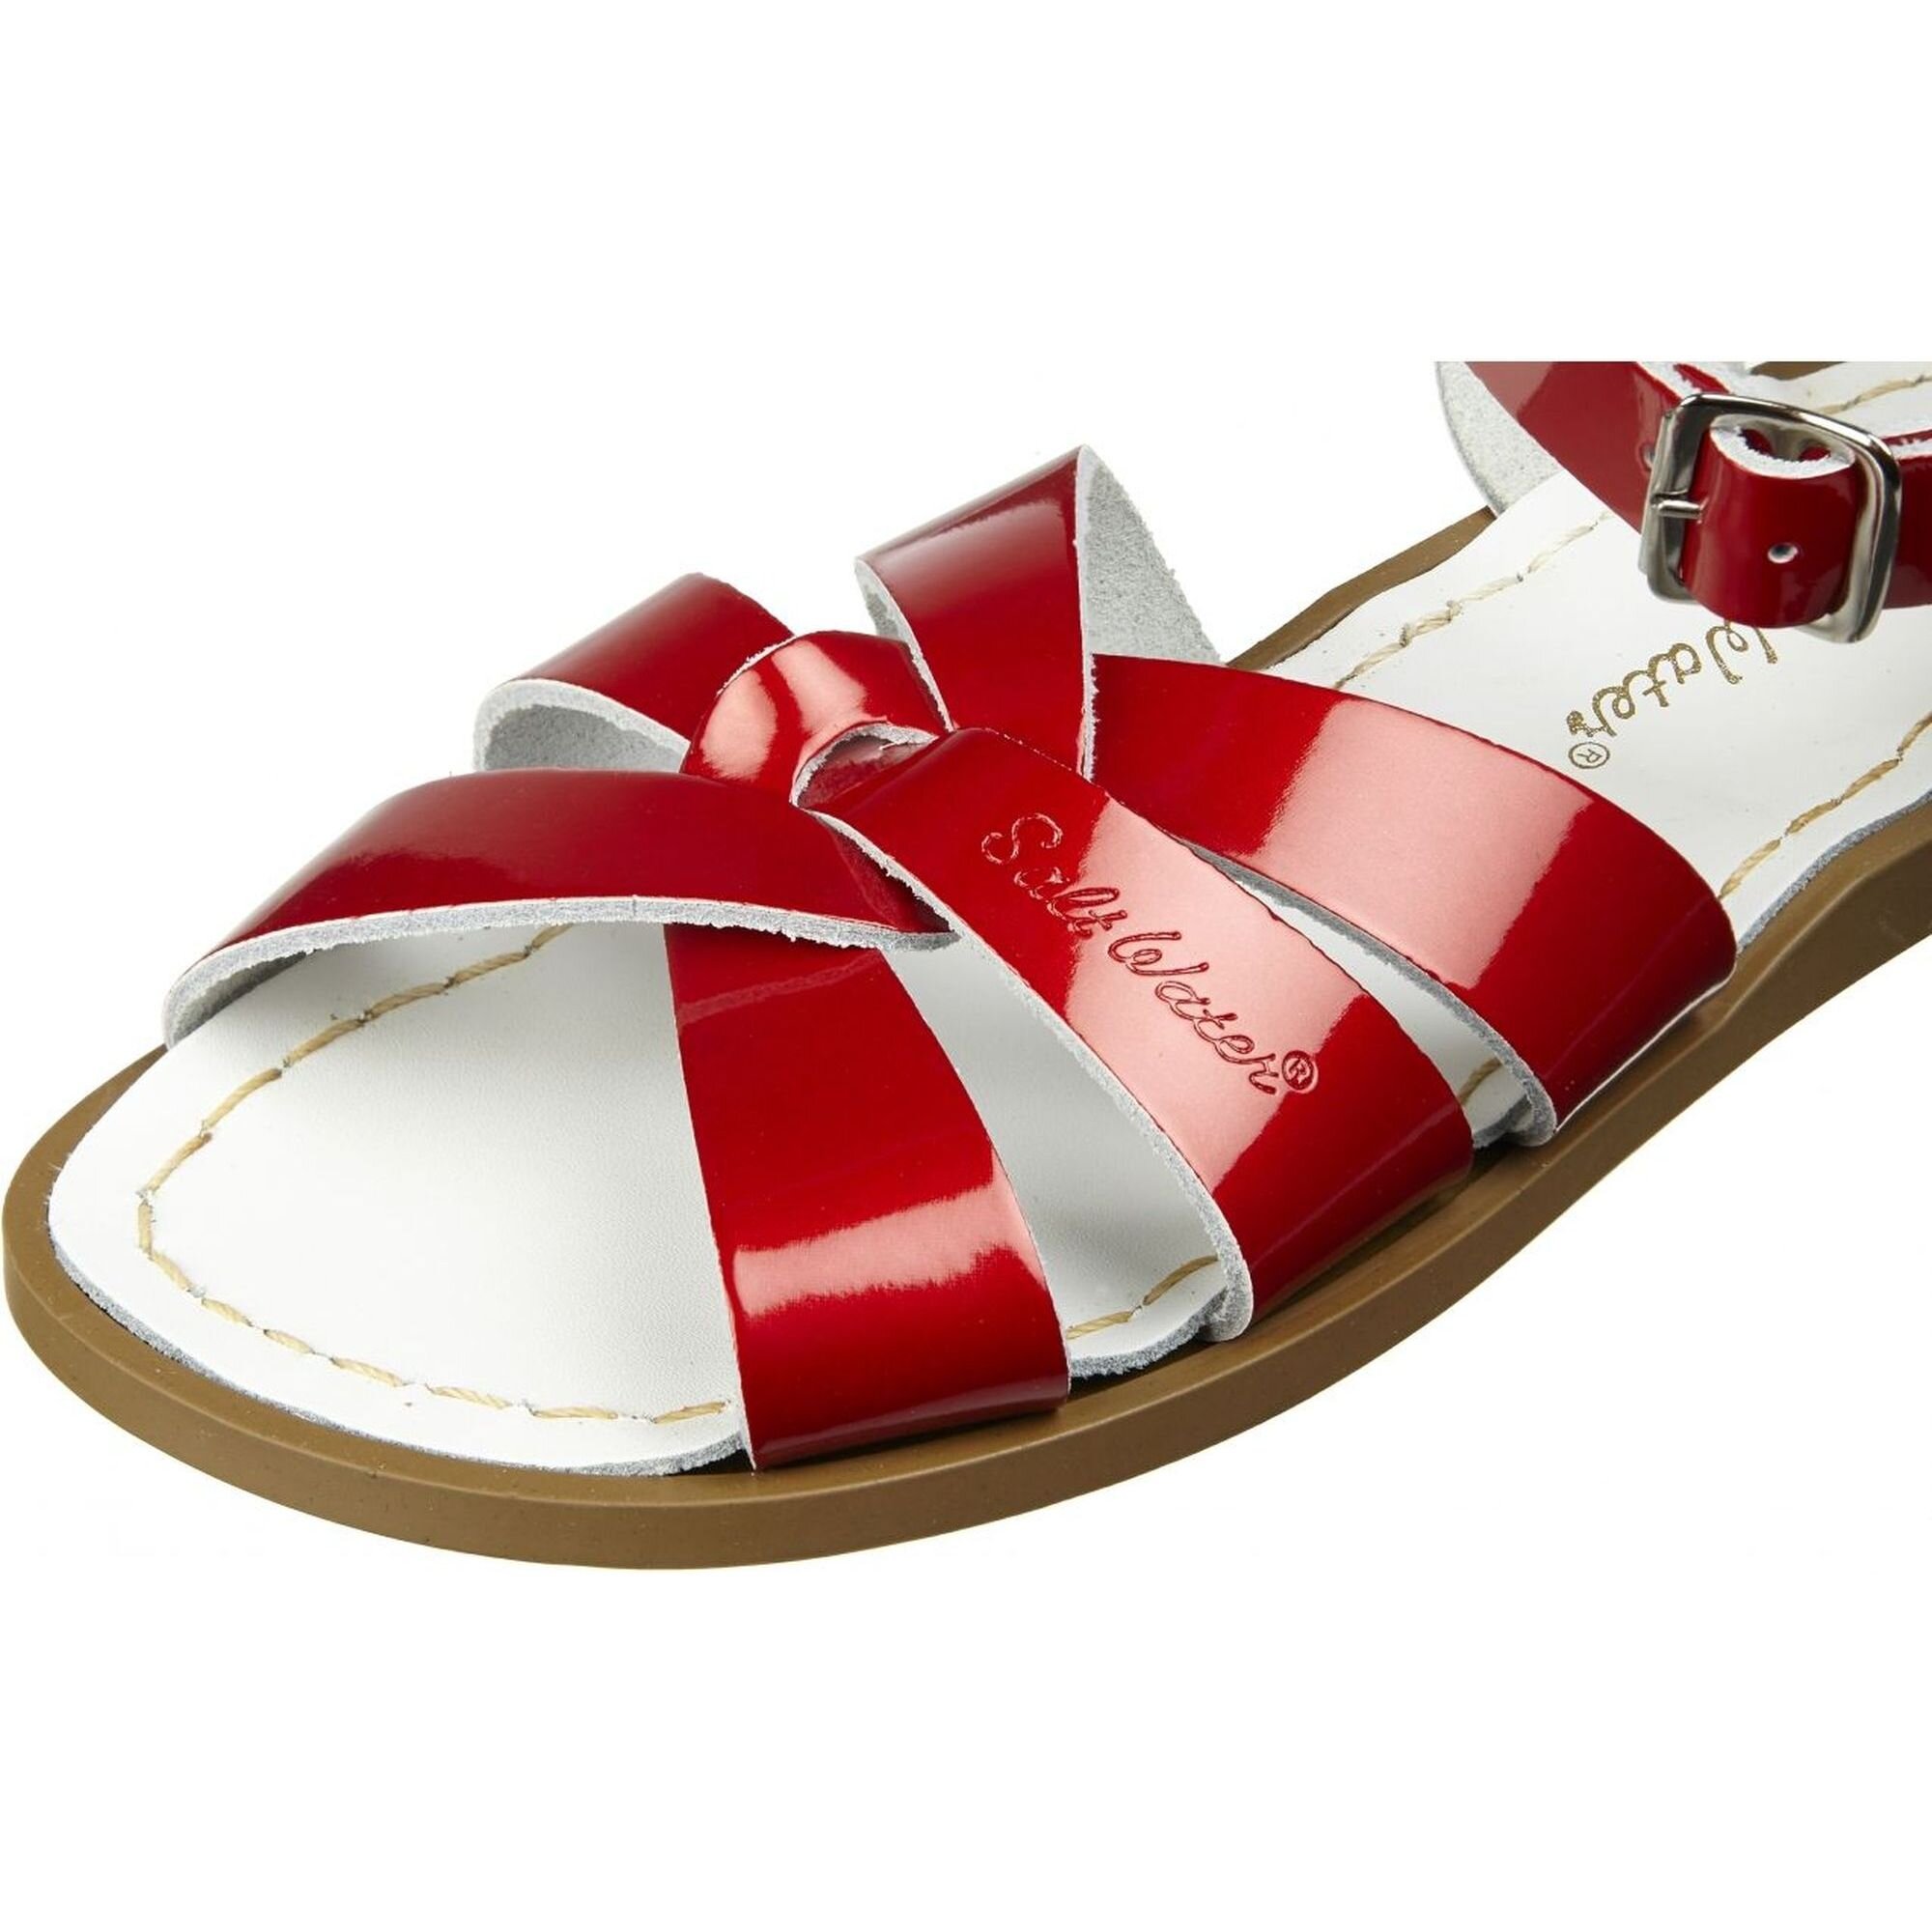 saltwater sandals candy red